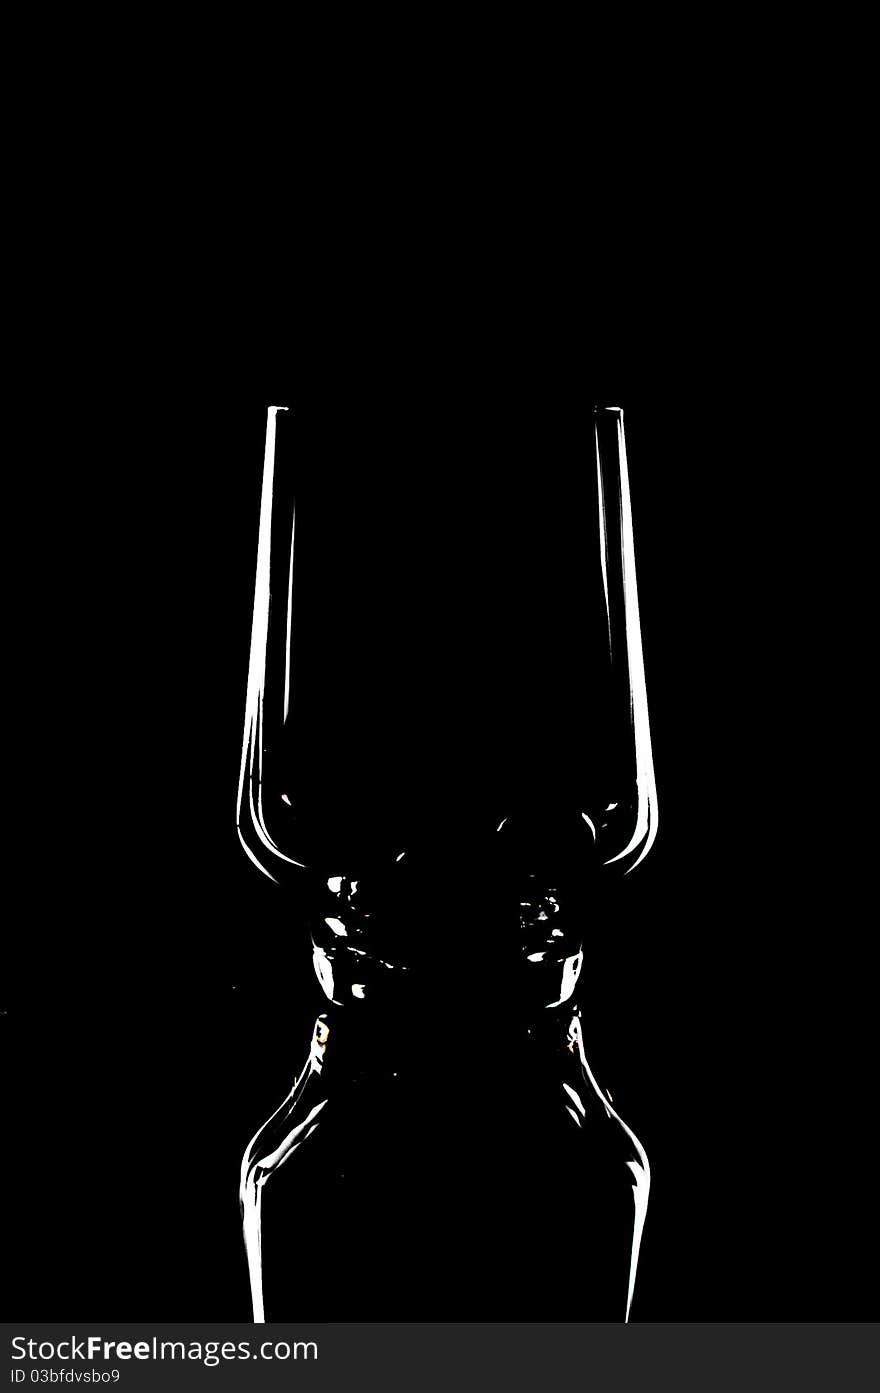 Contour t on a wine-glass glass empty on a black background. Contour t on a wine-glass glass empty on a black background